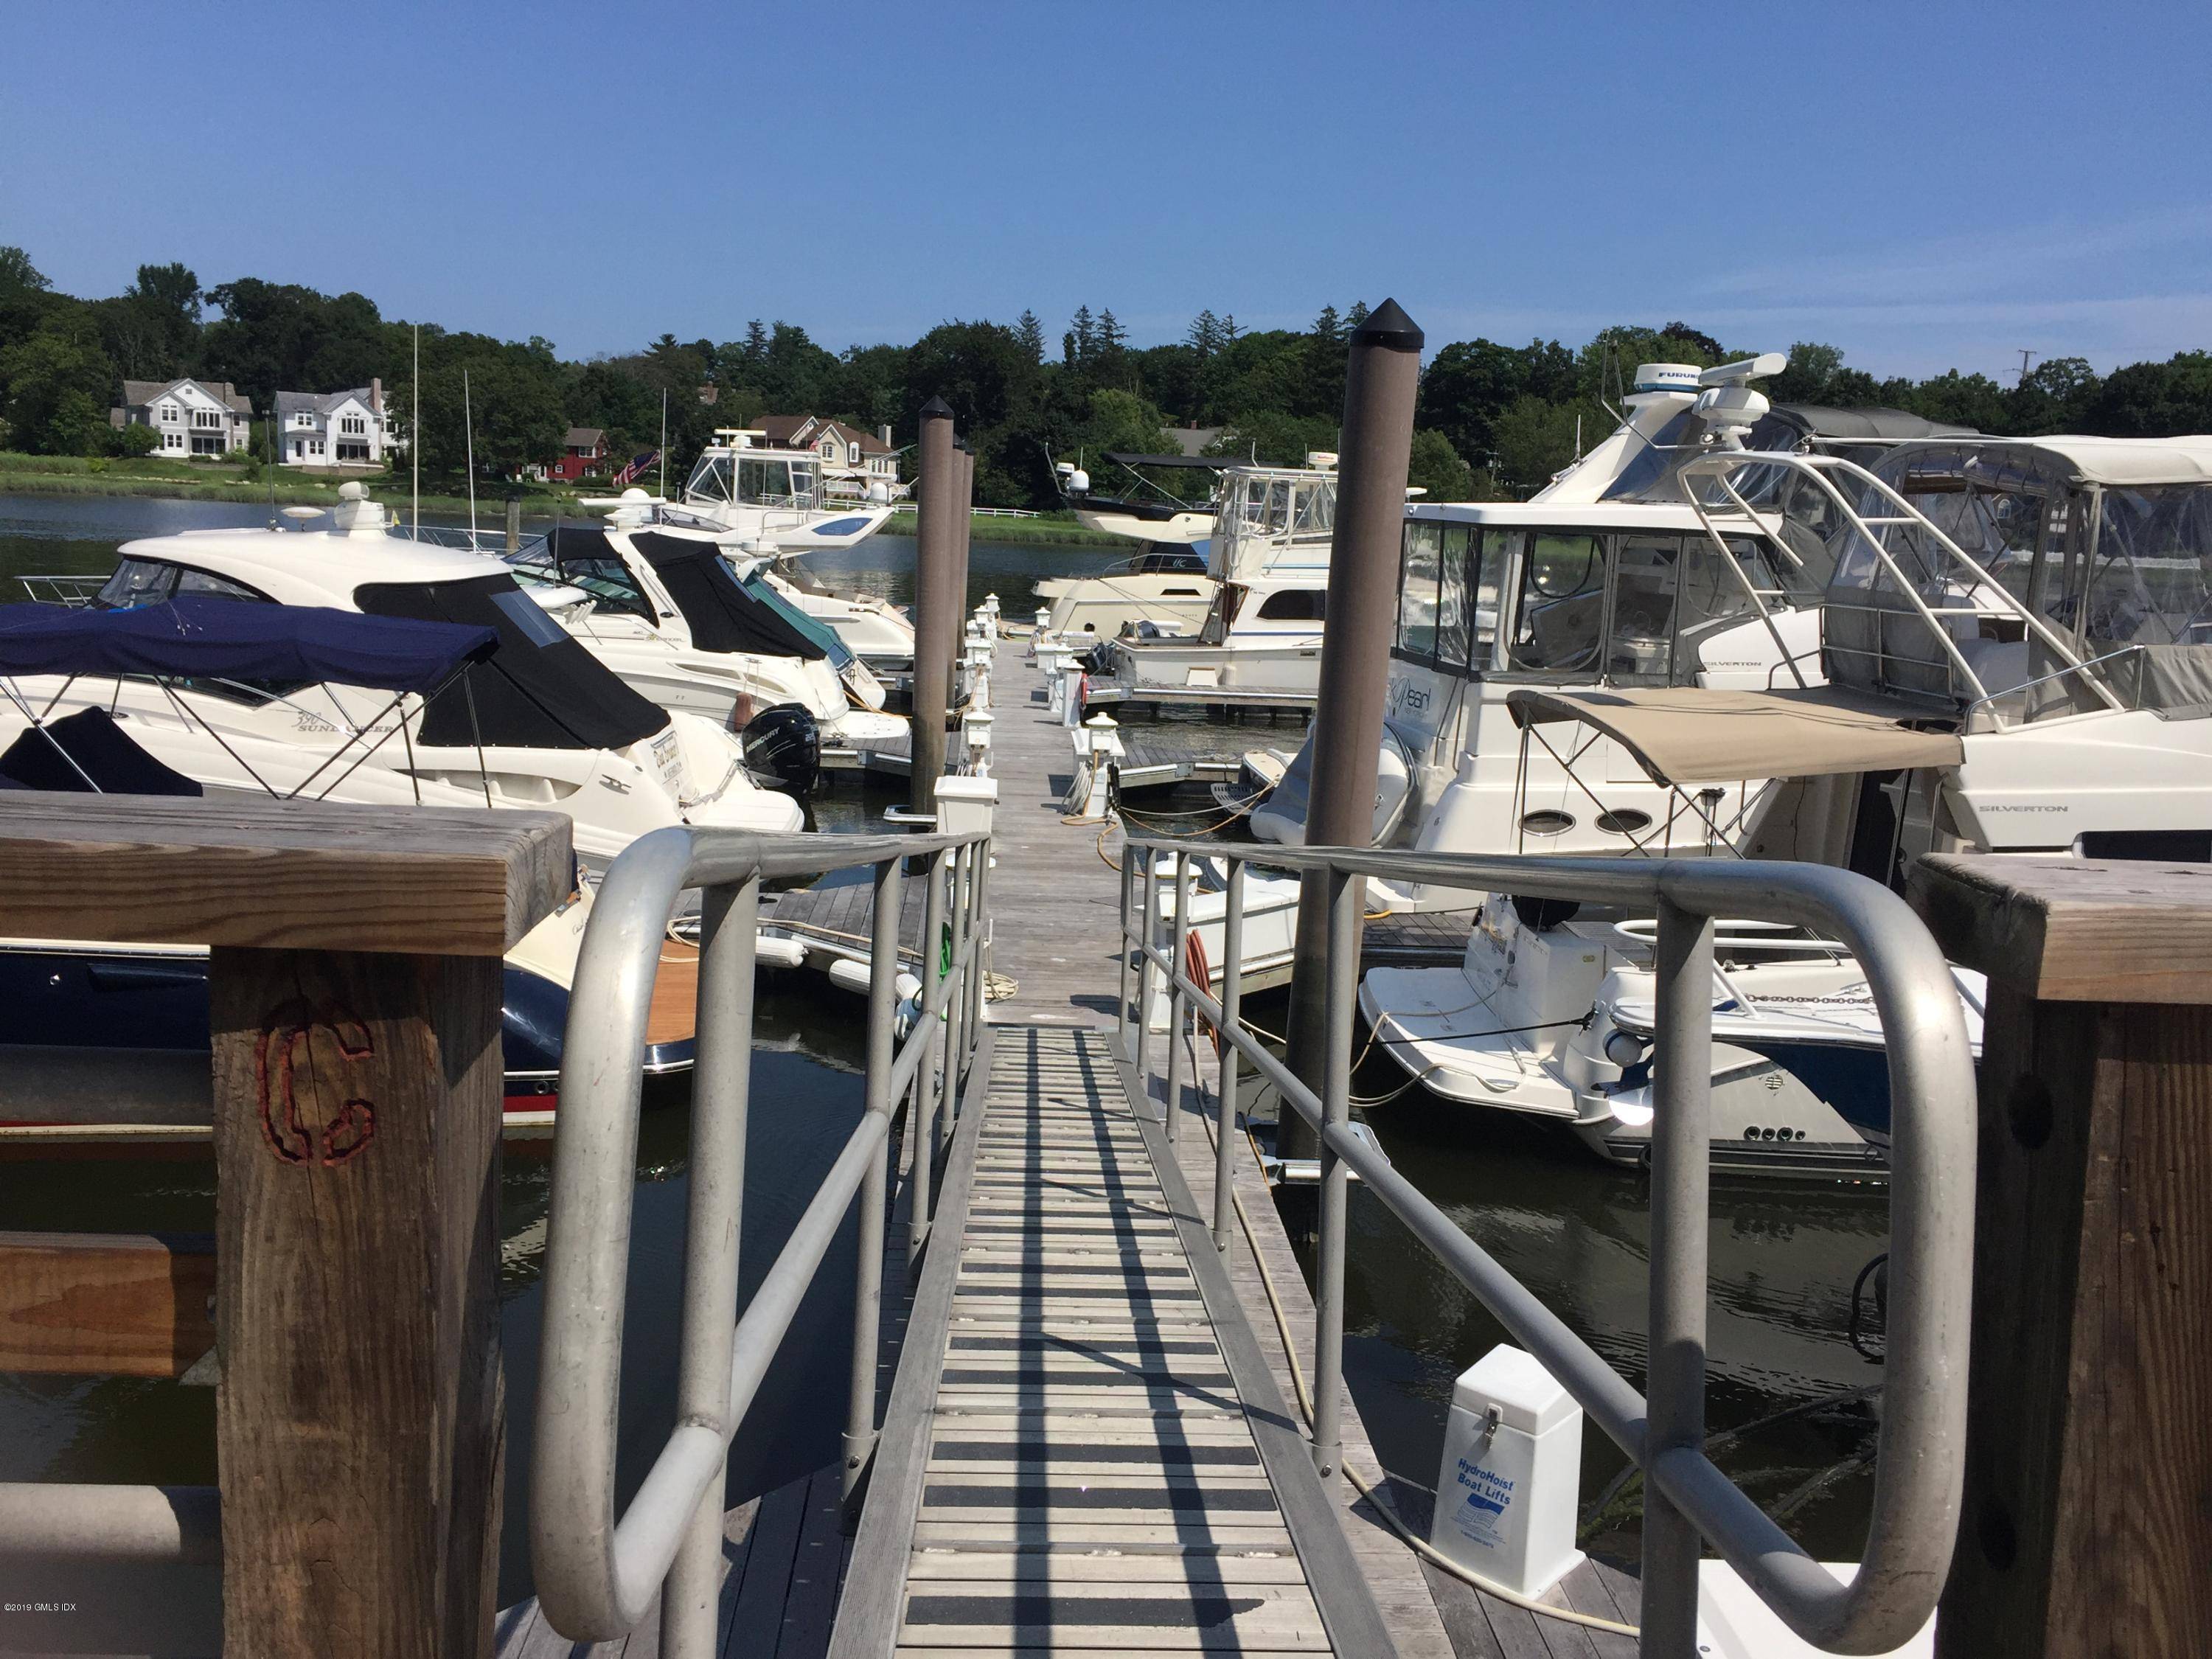 Unusual and excellent value for this 40' slip which can accommodate a boat up to 44'at the popular Palmer Point Marina.